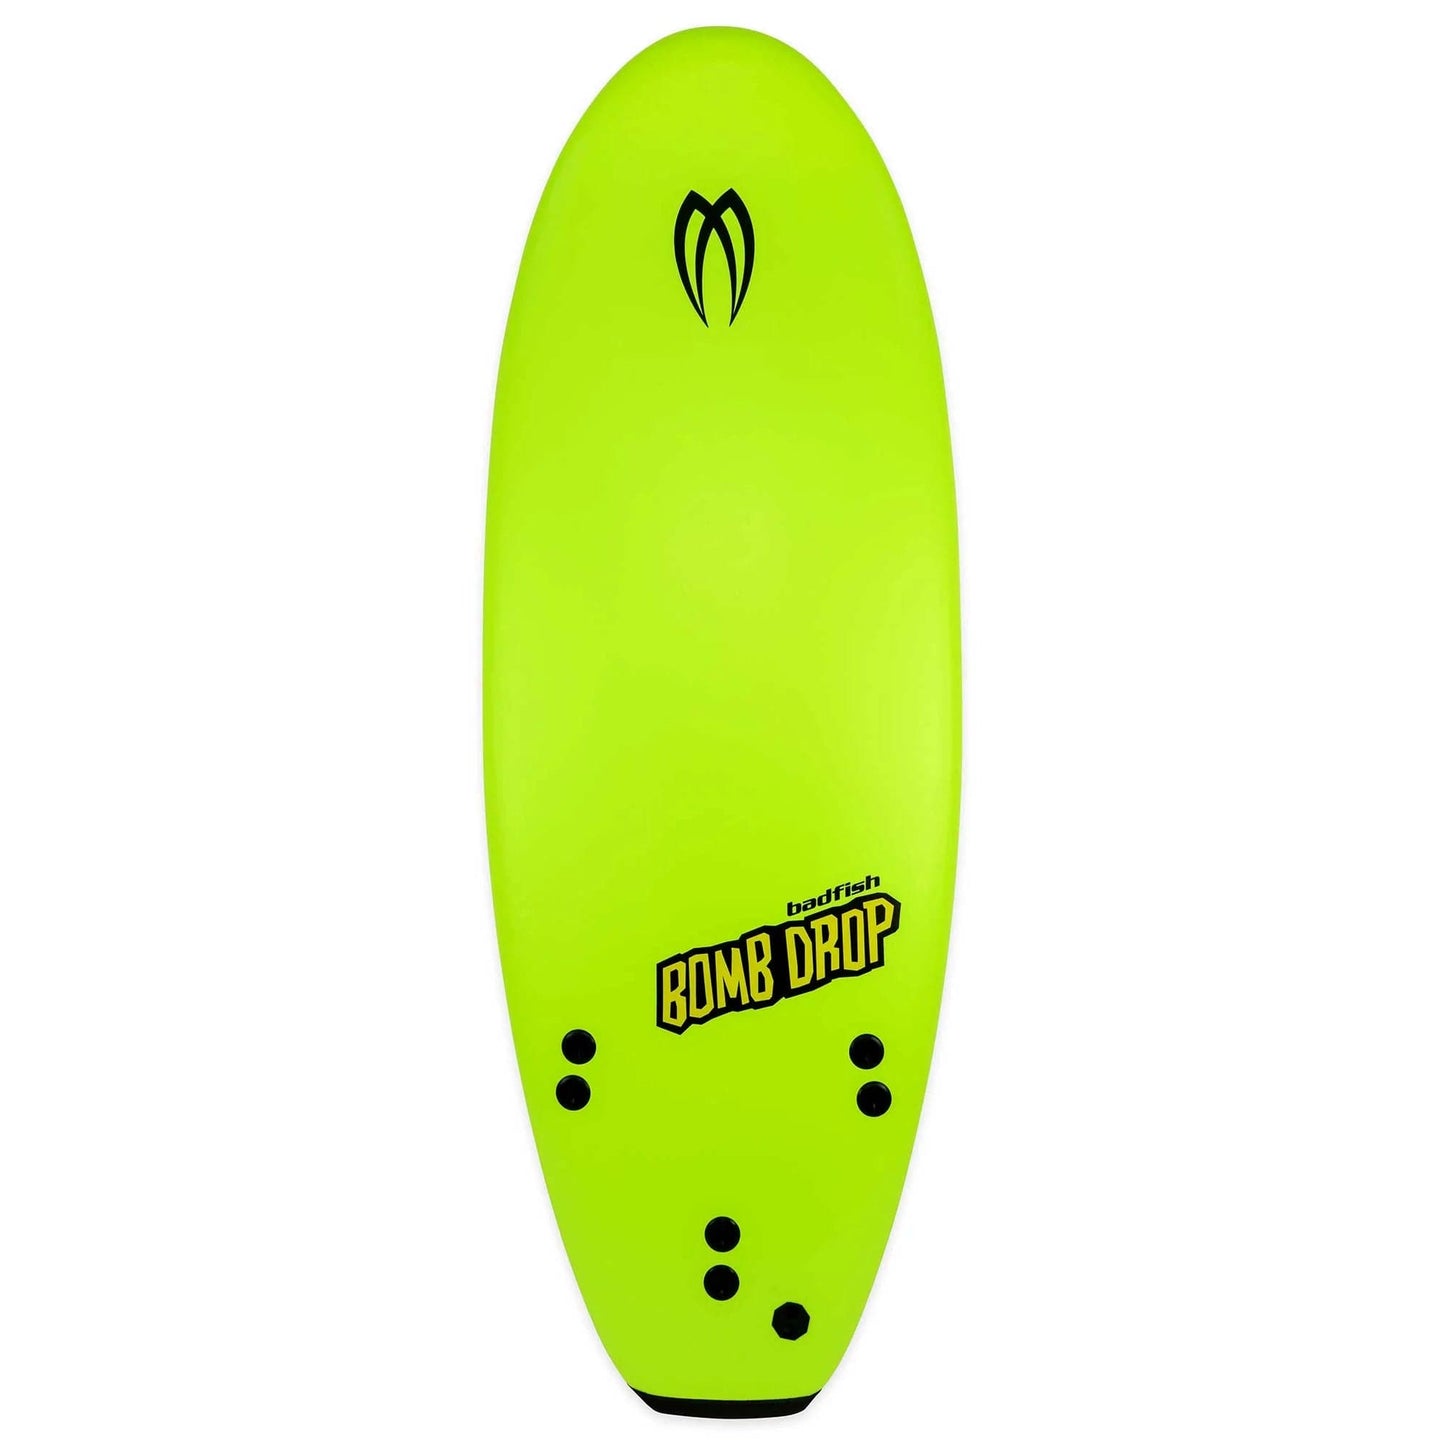 Featuring the Bomb Drop river surfing, whitewater sup manufactured by Badfish shown here from a fourth angle.